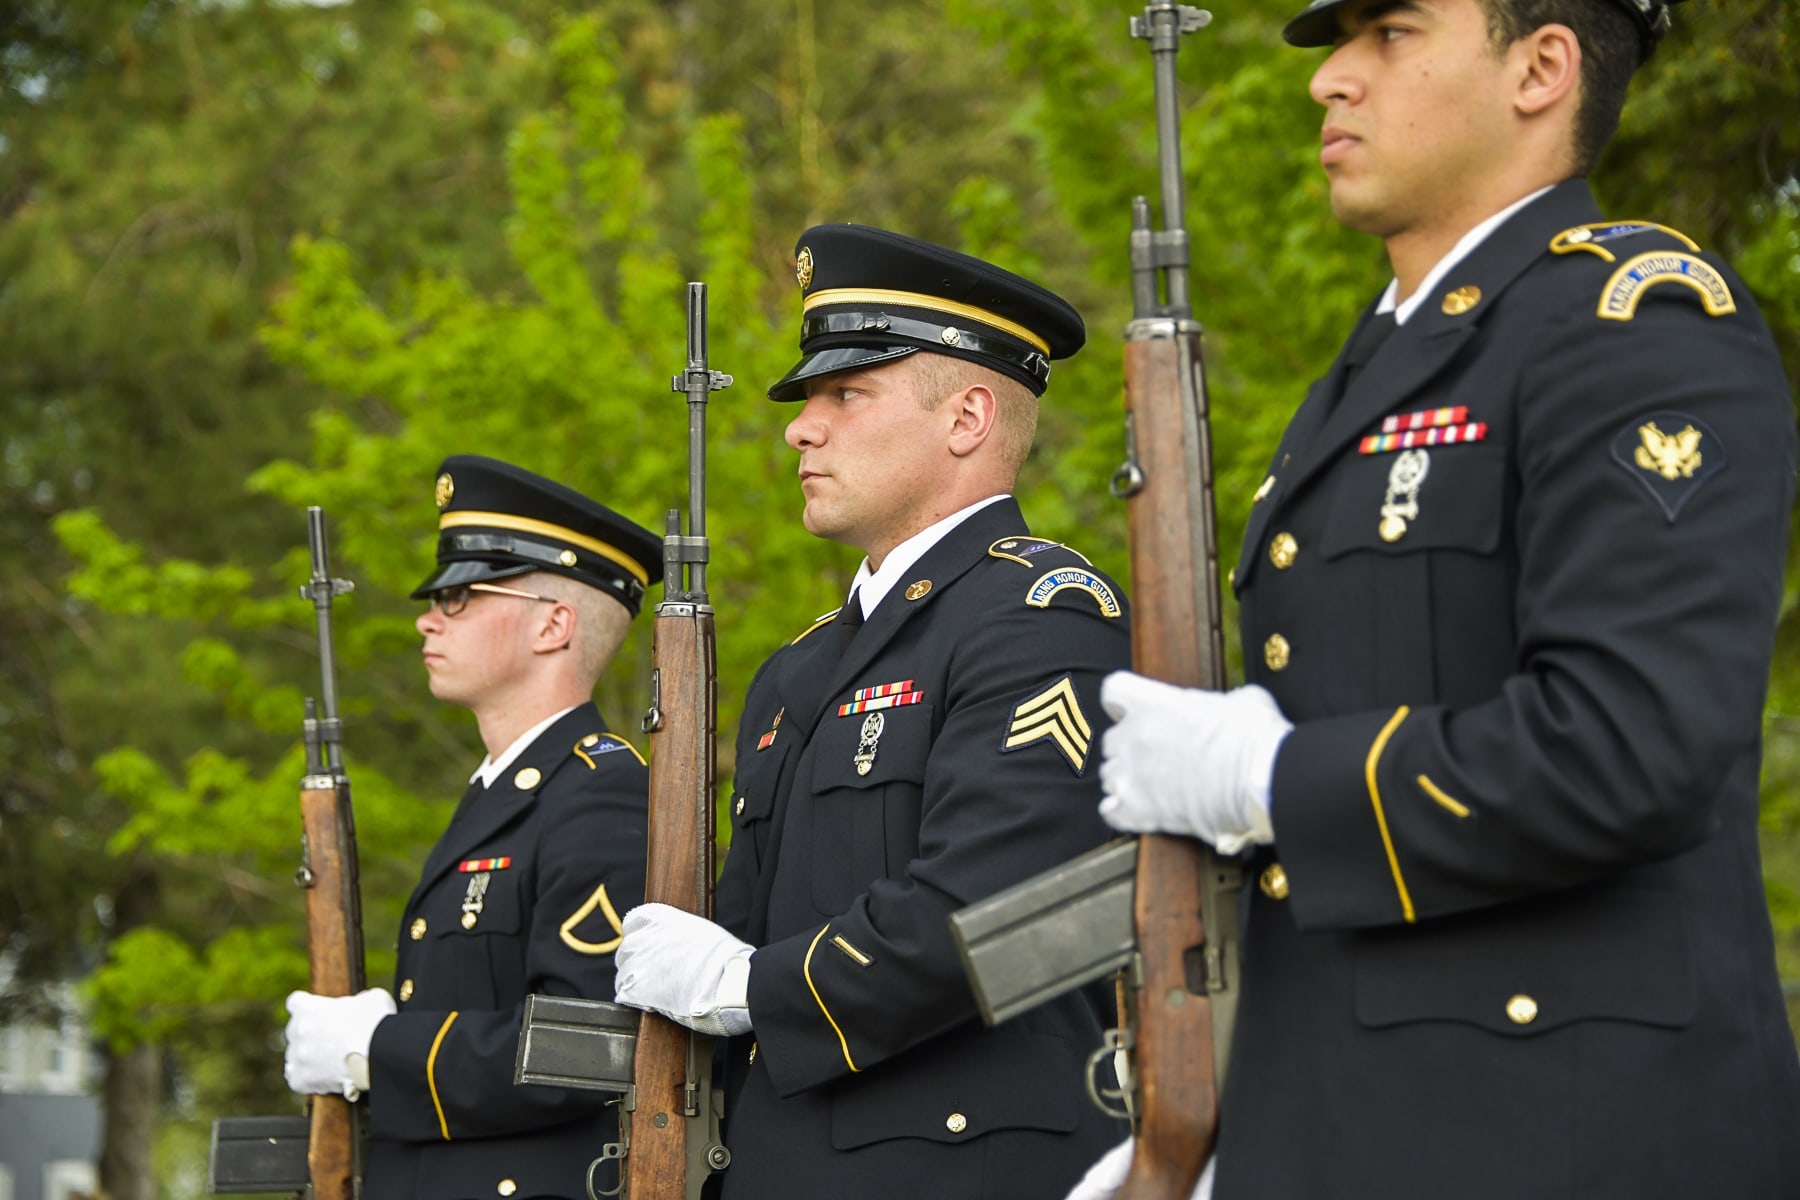 Three men in formal military uniforms hold rifles and stand at attention